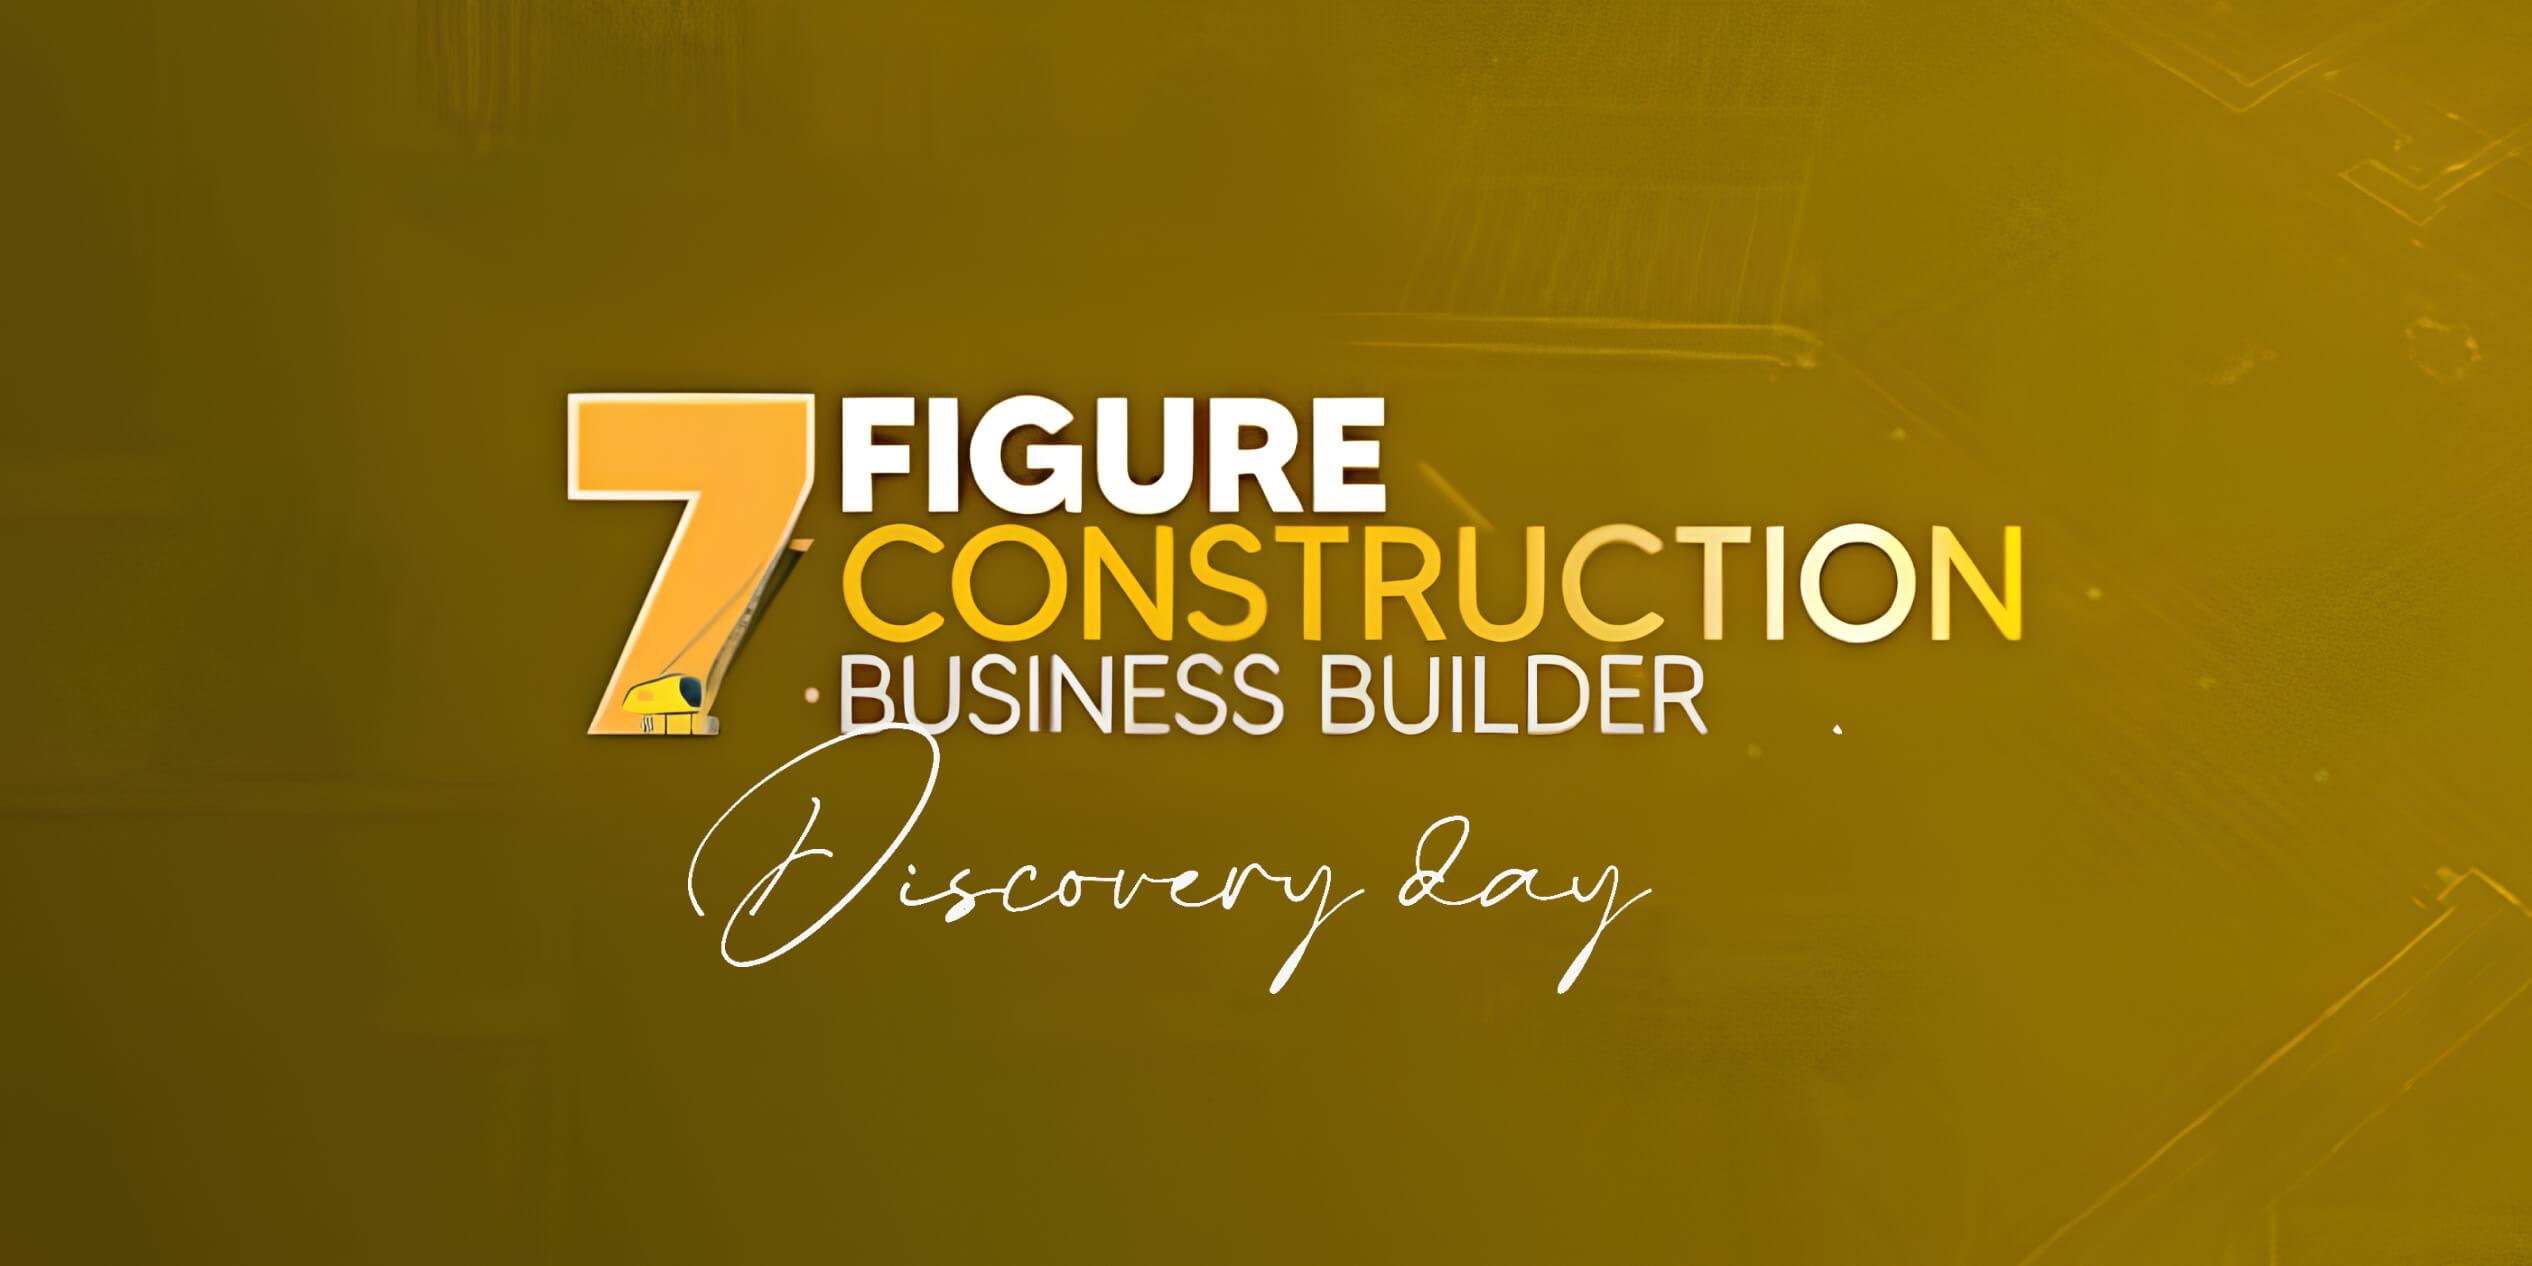 Image of a 7-figure construction business builder, showcasing expertise and success in the construction industry